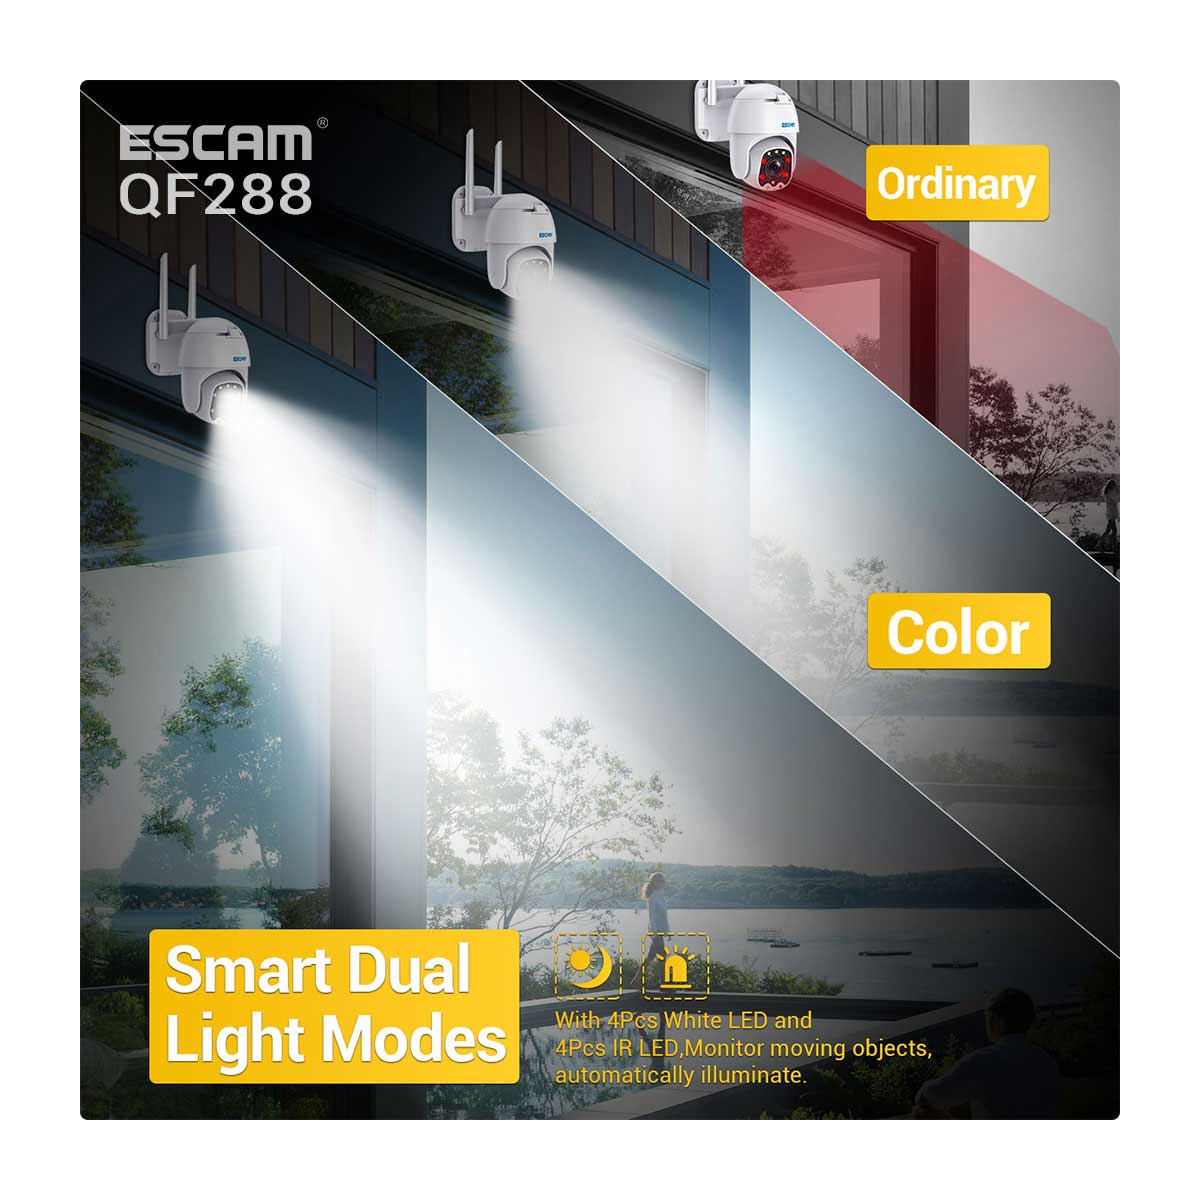 ESCAM-QF288-3MP-PanTilt-8X-Zoom-AI-Humanoid-detection-Cloud-Storage-Waterproof-WiFi-IP-Camera-with-T-1693500-4